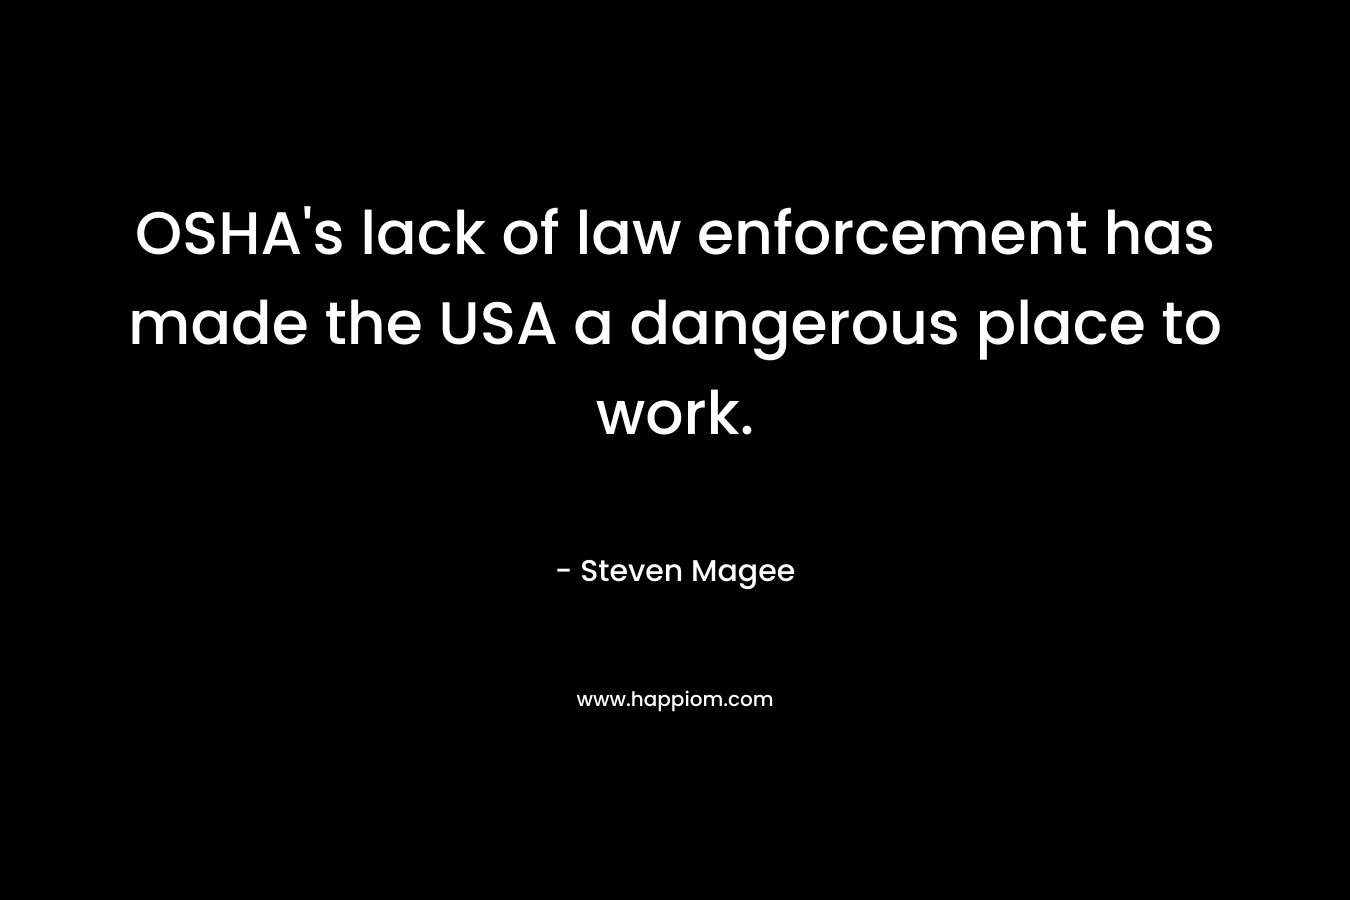 OSHA’s lack of law enforcement has made the USA a dangerous place to work. – Steven Magee